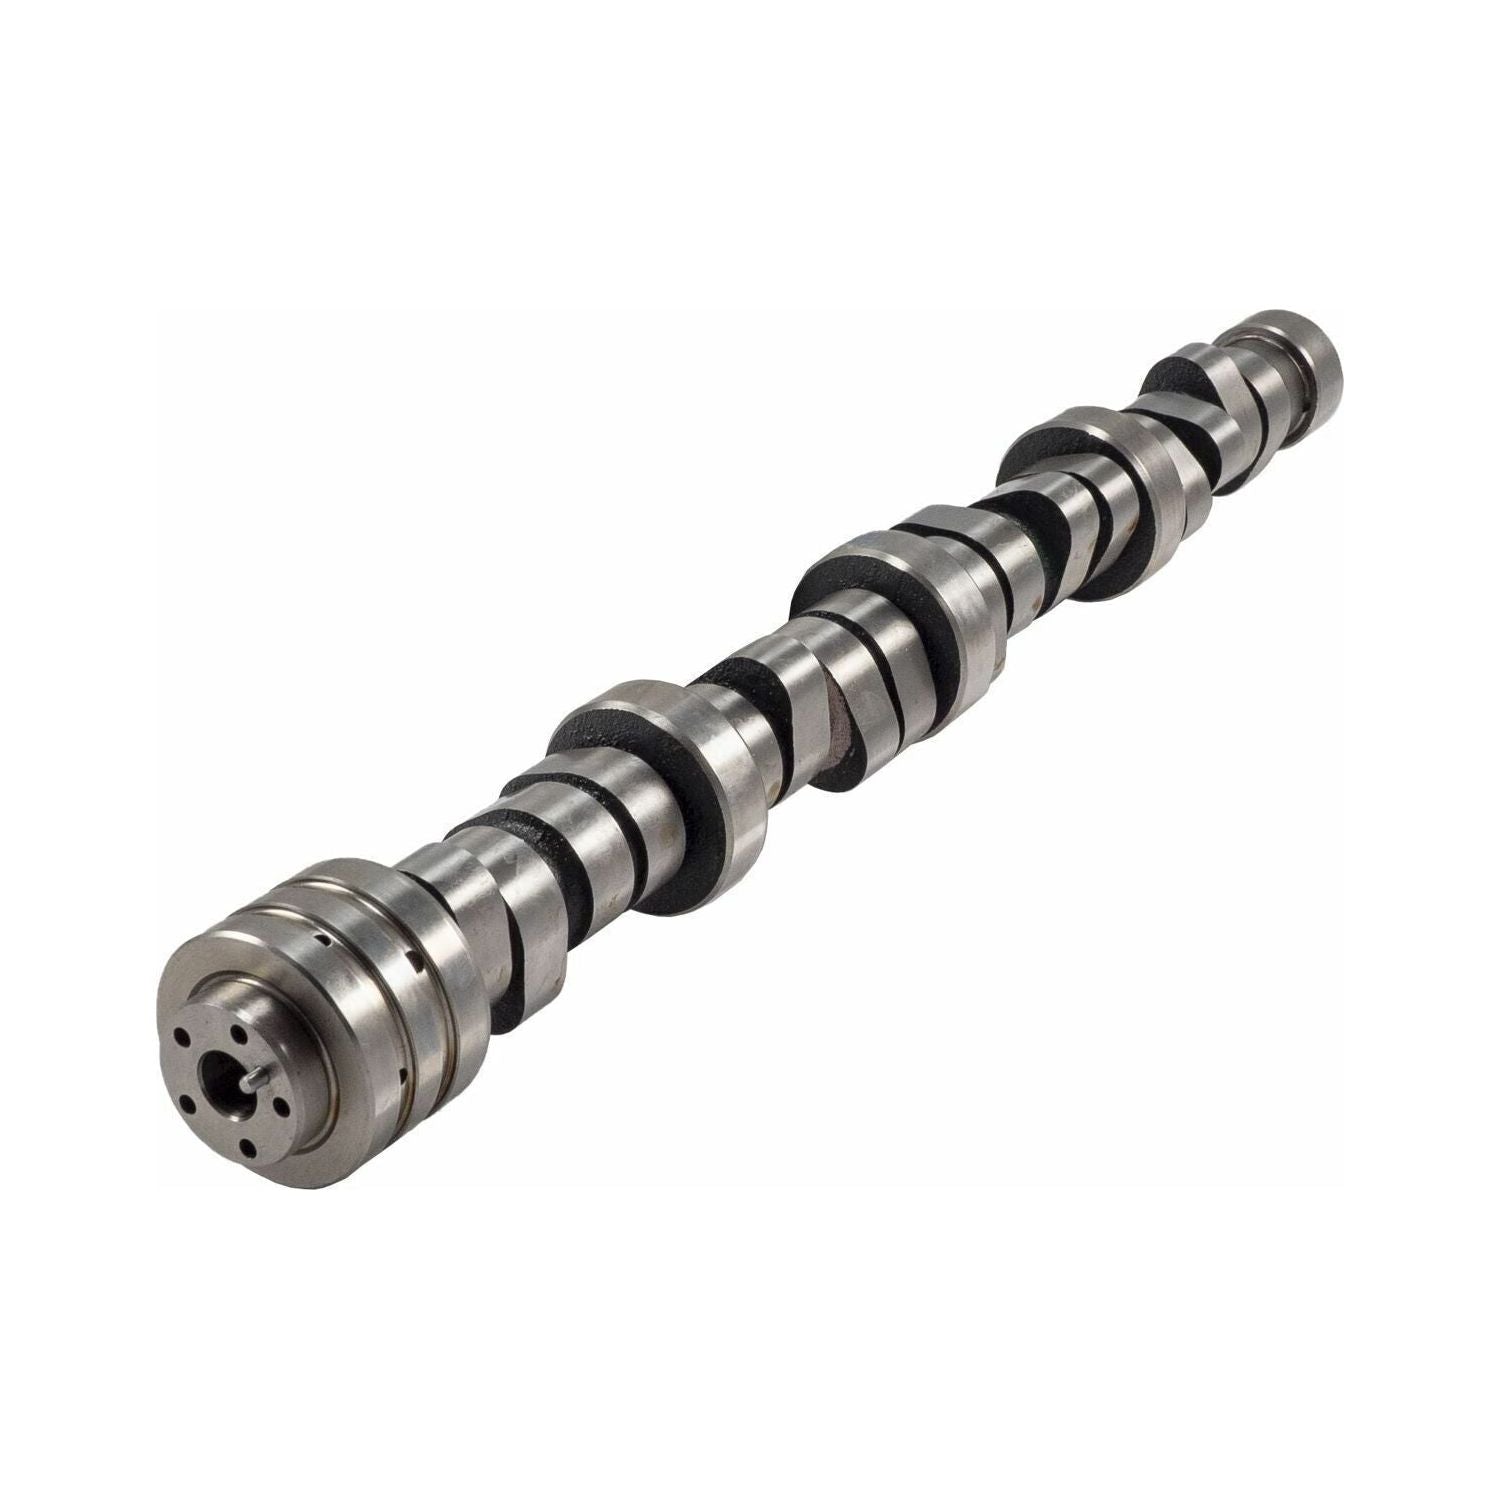 Melling Stock Replacement Camshafts MC1402